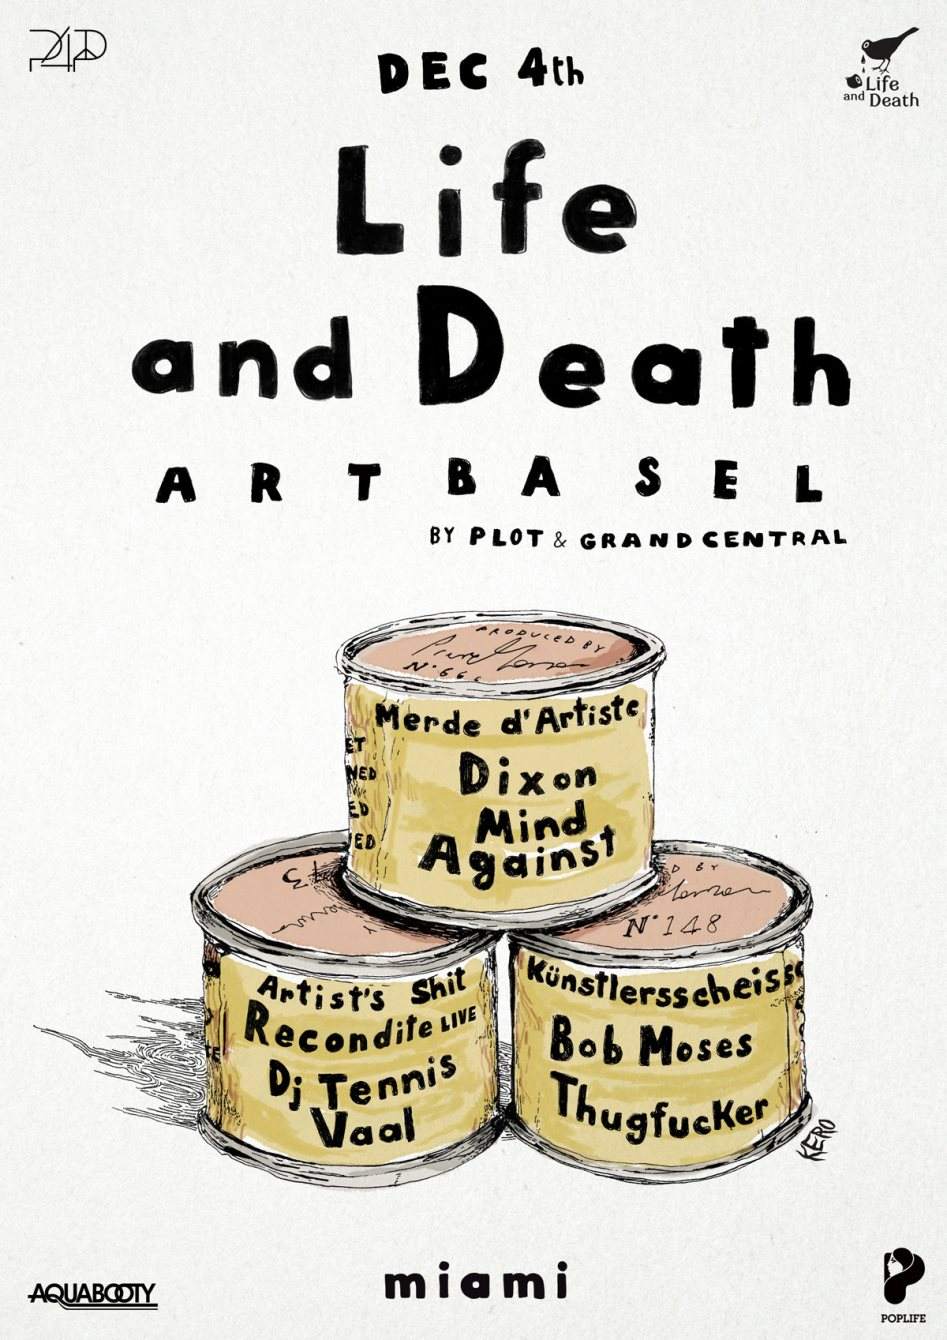 Life and Death - Art Basel by P L 0 T & Grand Central - Página frontal